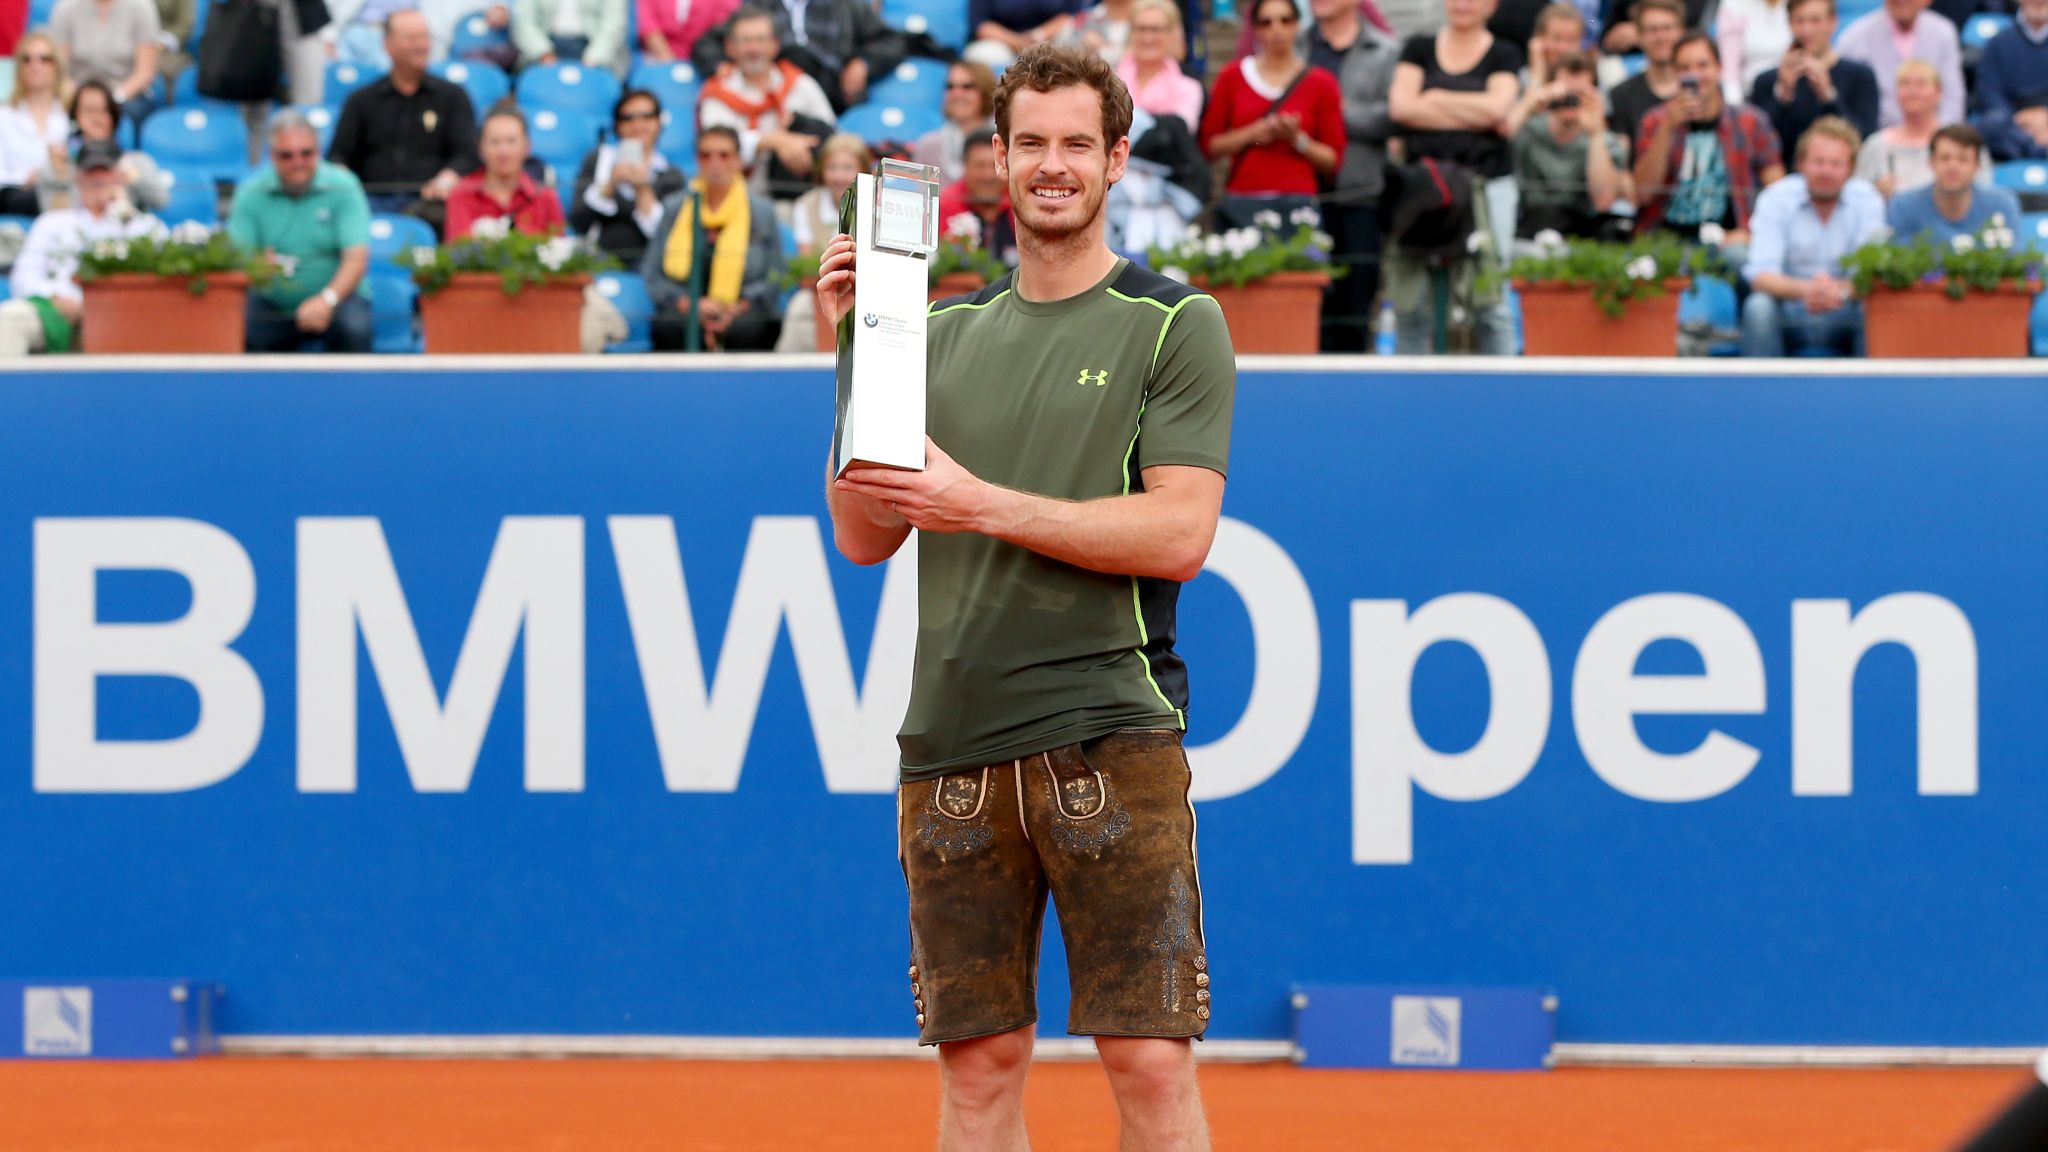 Andy Murray wins first clay court title at BMW Open in Munich Tennis News Sky Sports